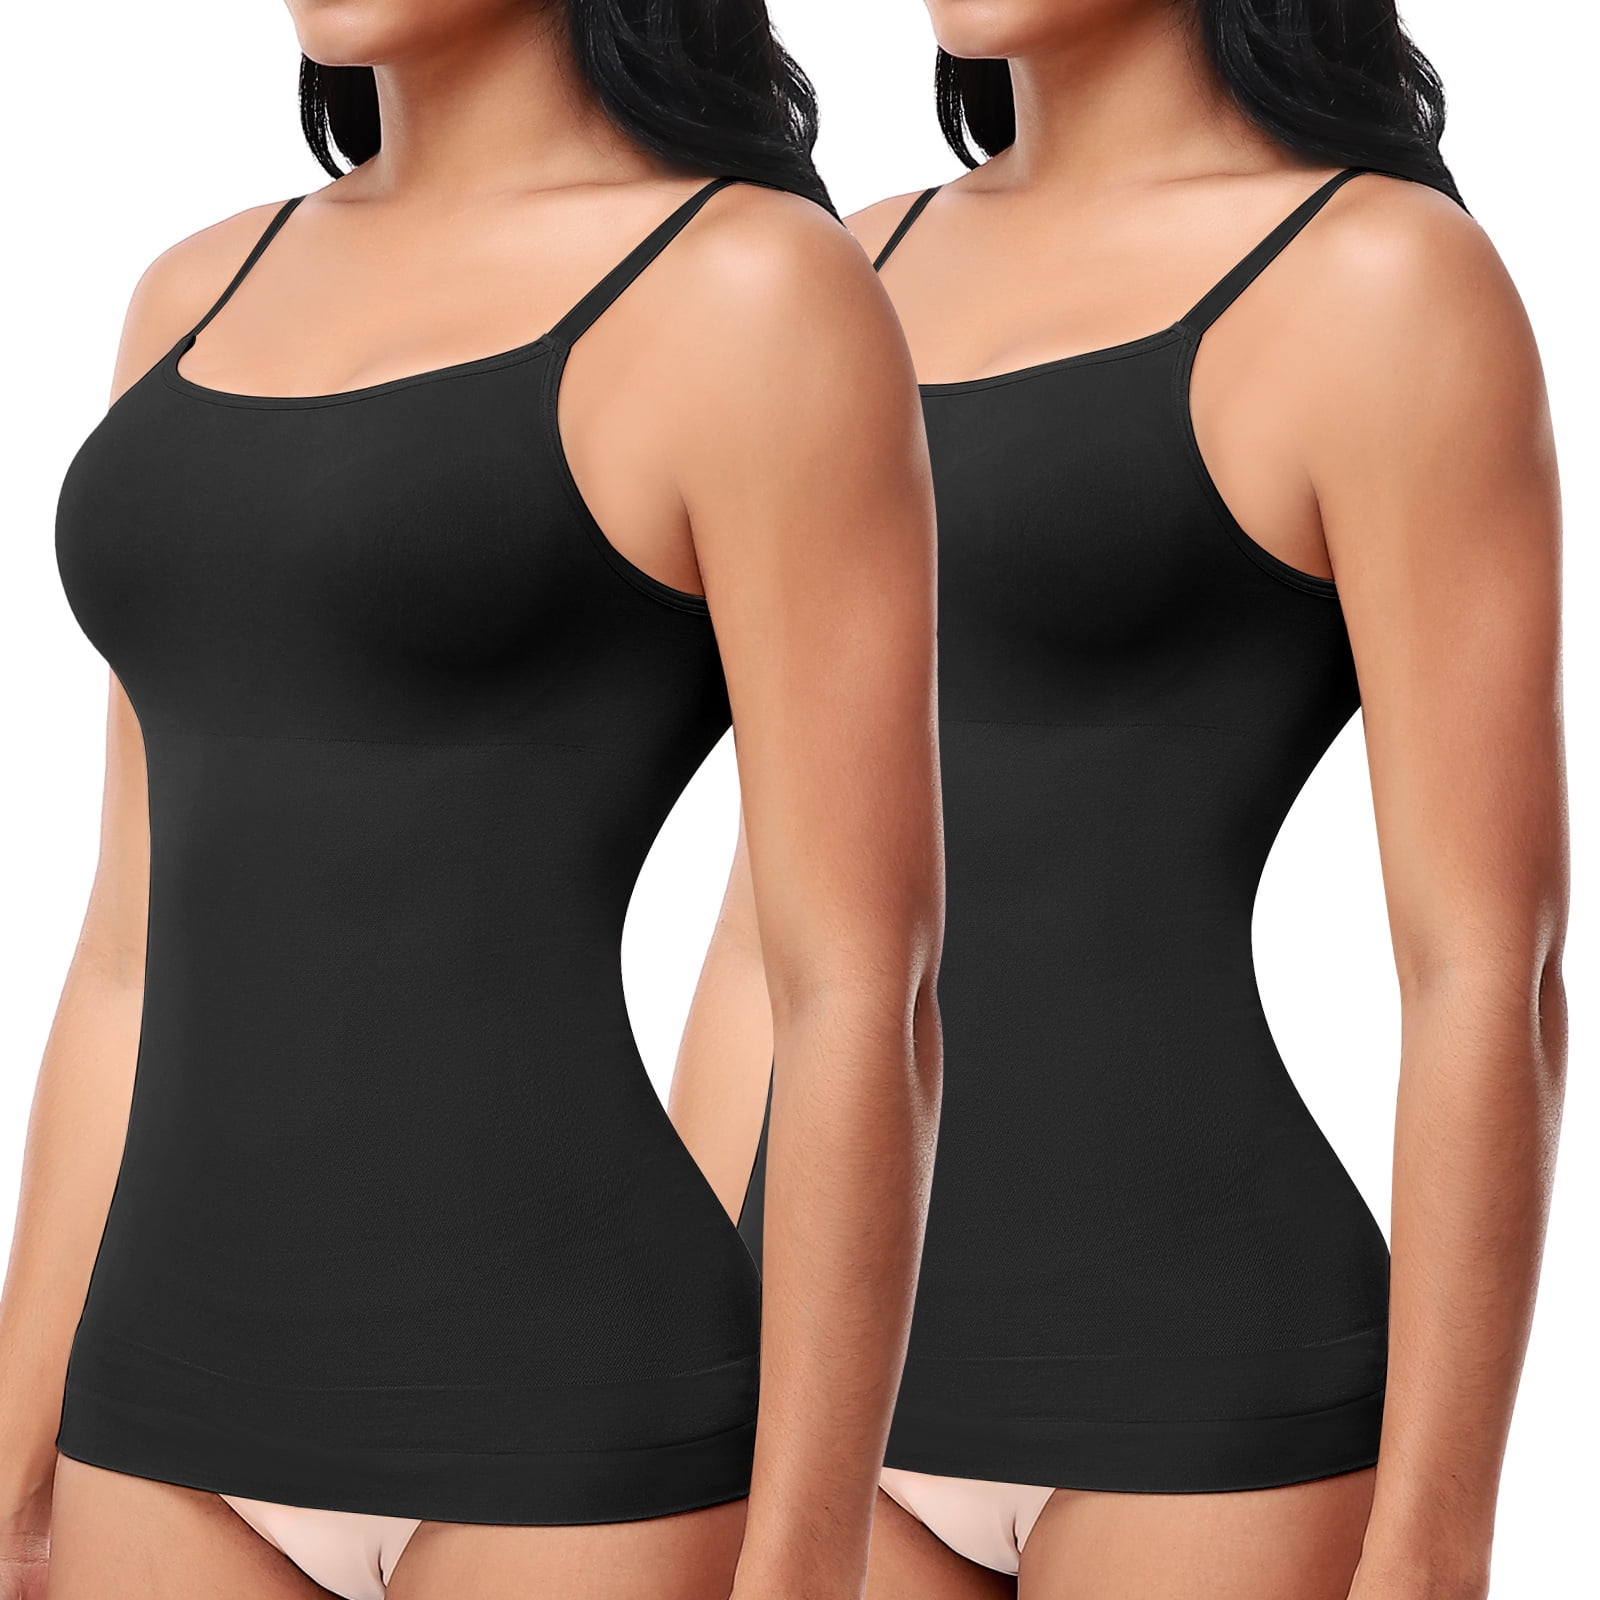 Up To 84% Off on Women's Slim Compression Tank